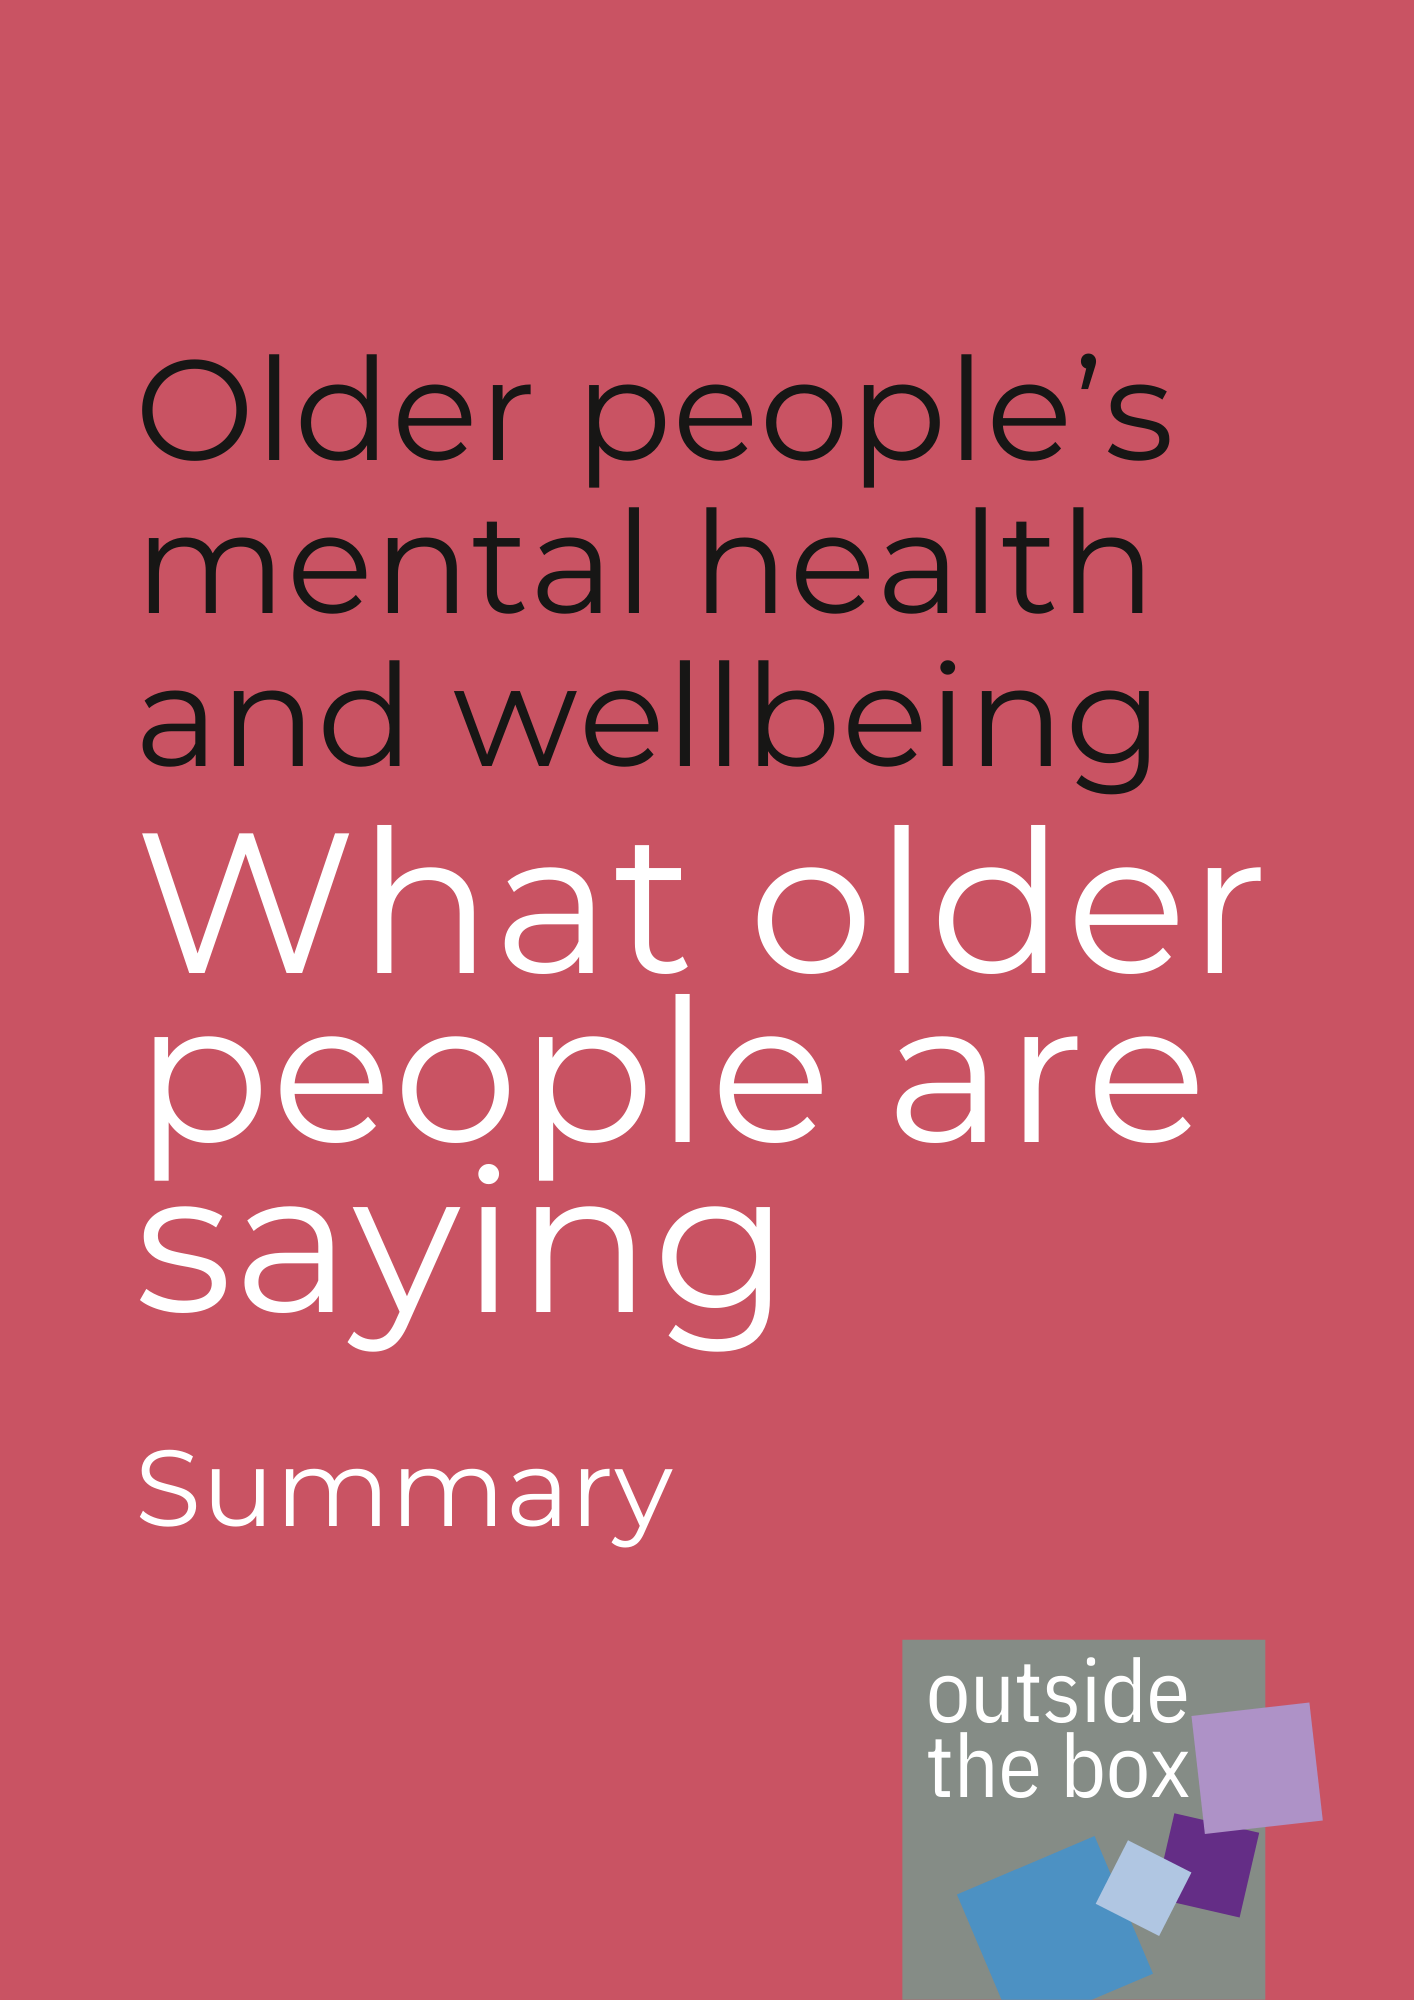 Older people's mental health and wellbeing - what older people are saying - Summary